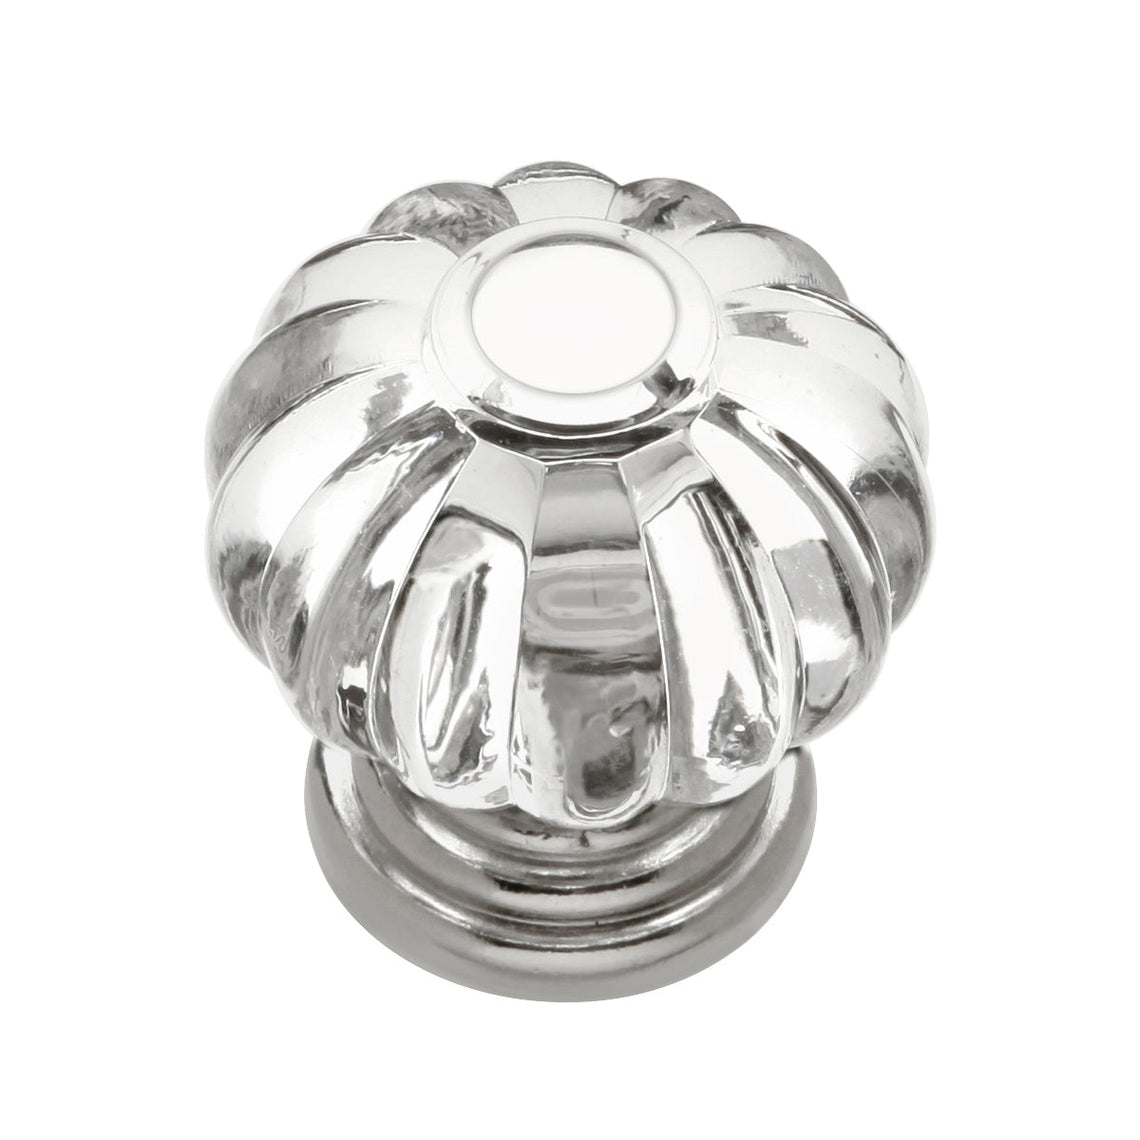 Polished Nickel Knob 1-1/8 Inch Diameter - Crystal Palace Collection